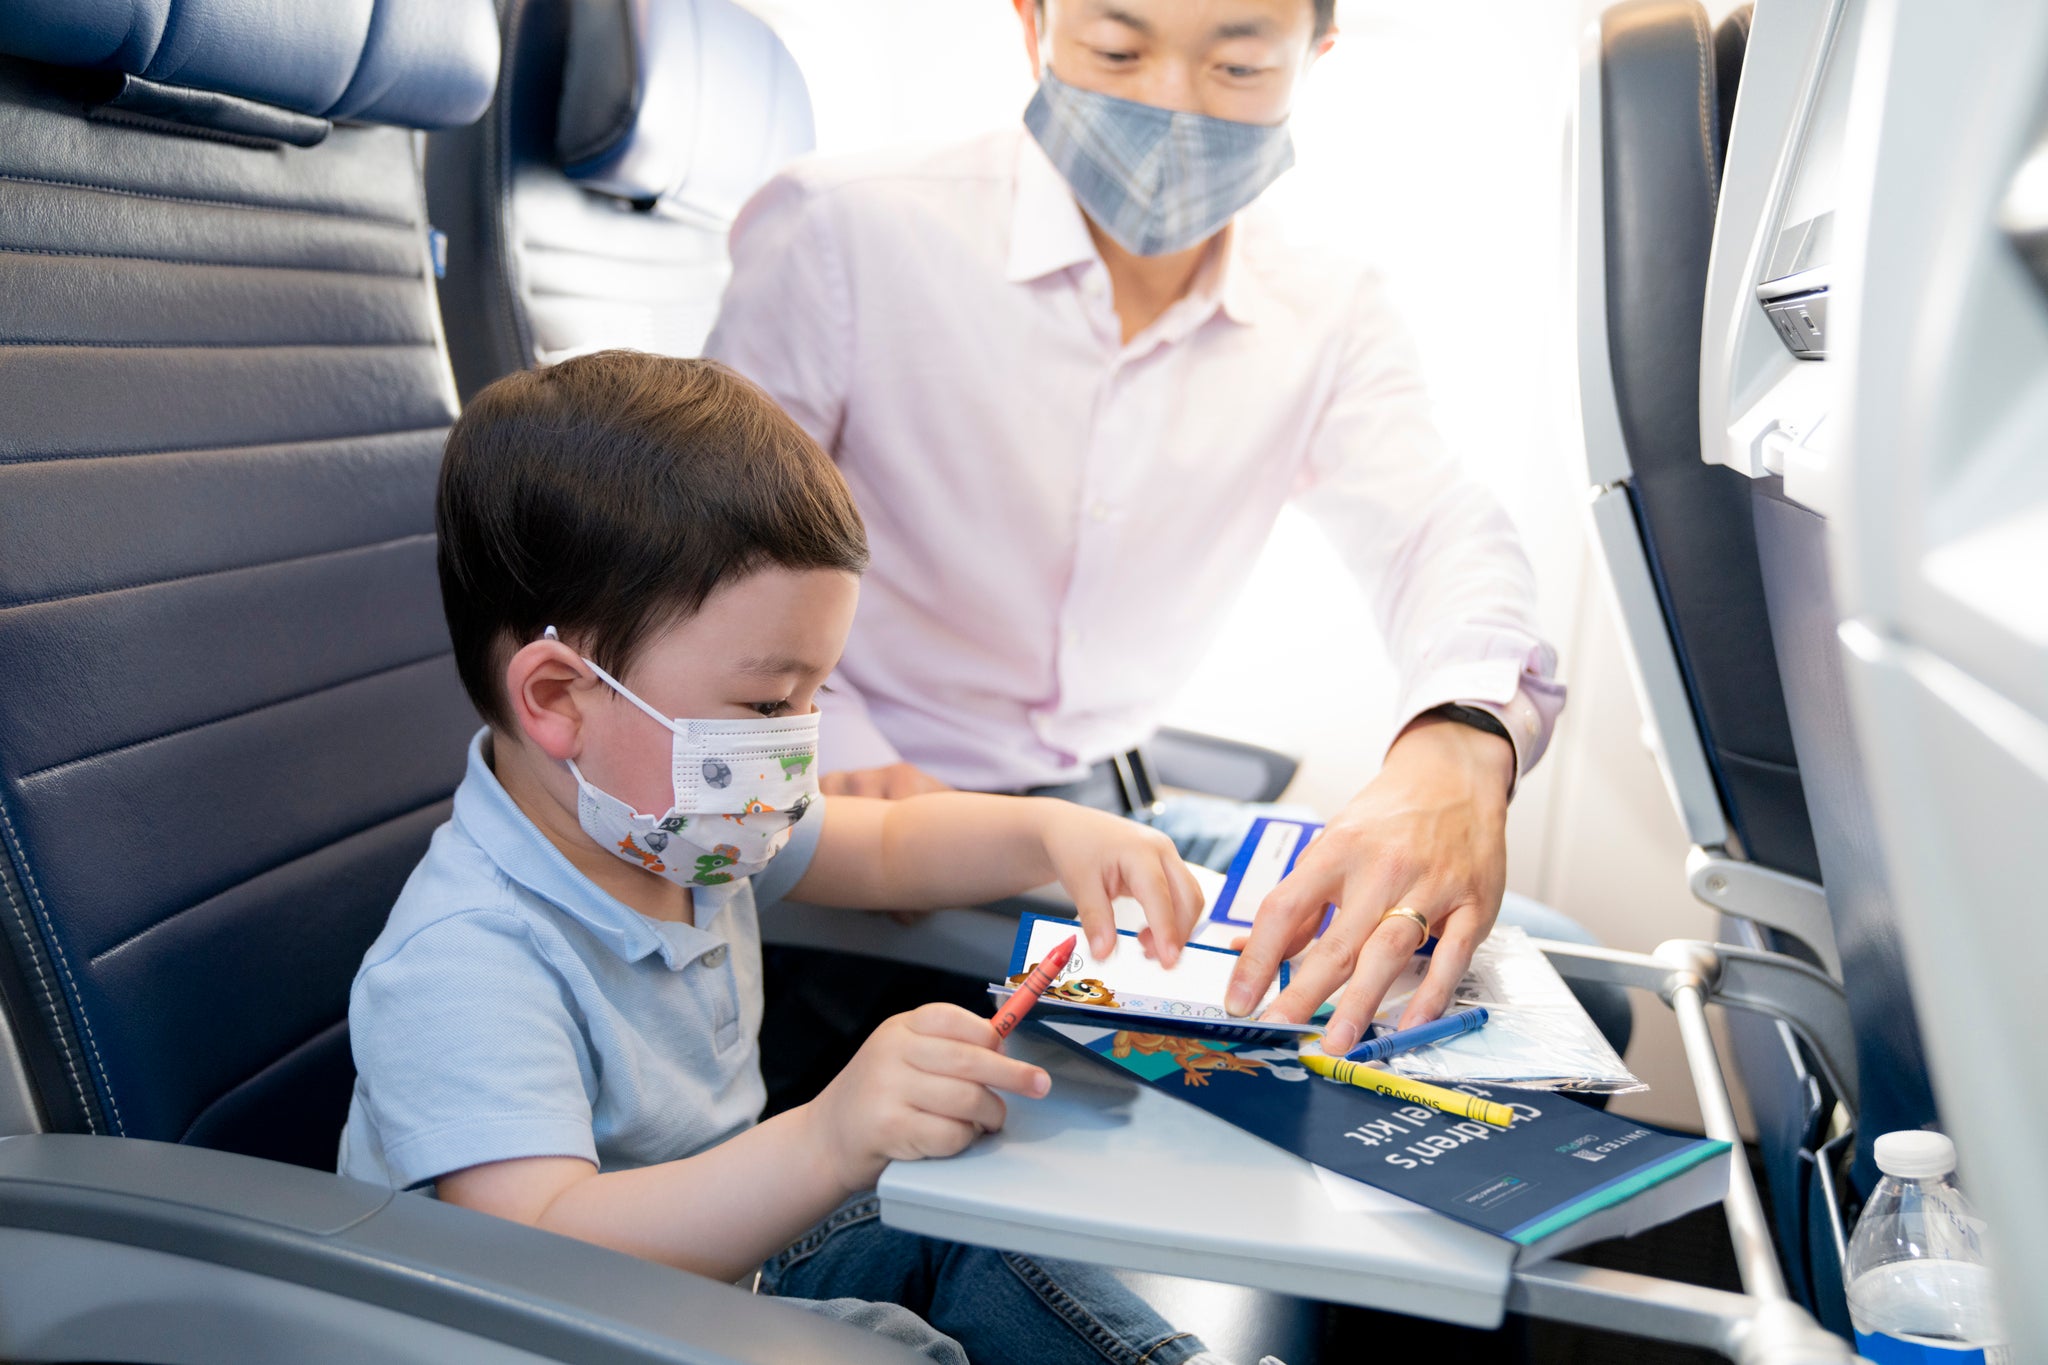 United introduces complimentary child amenity kits on all mainline flights